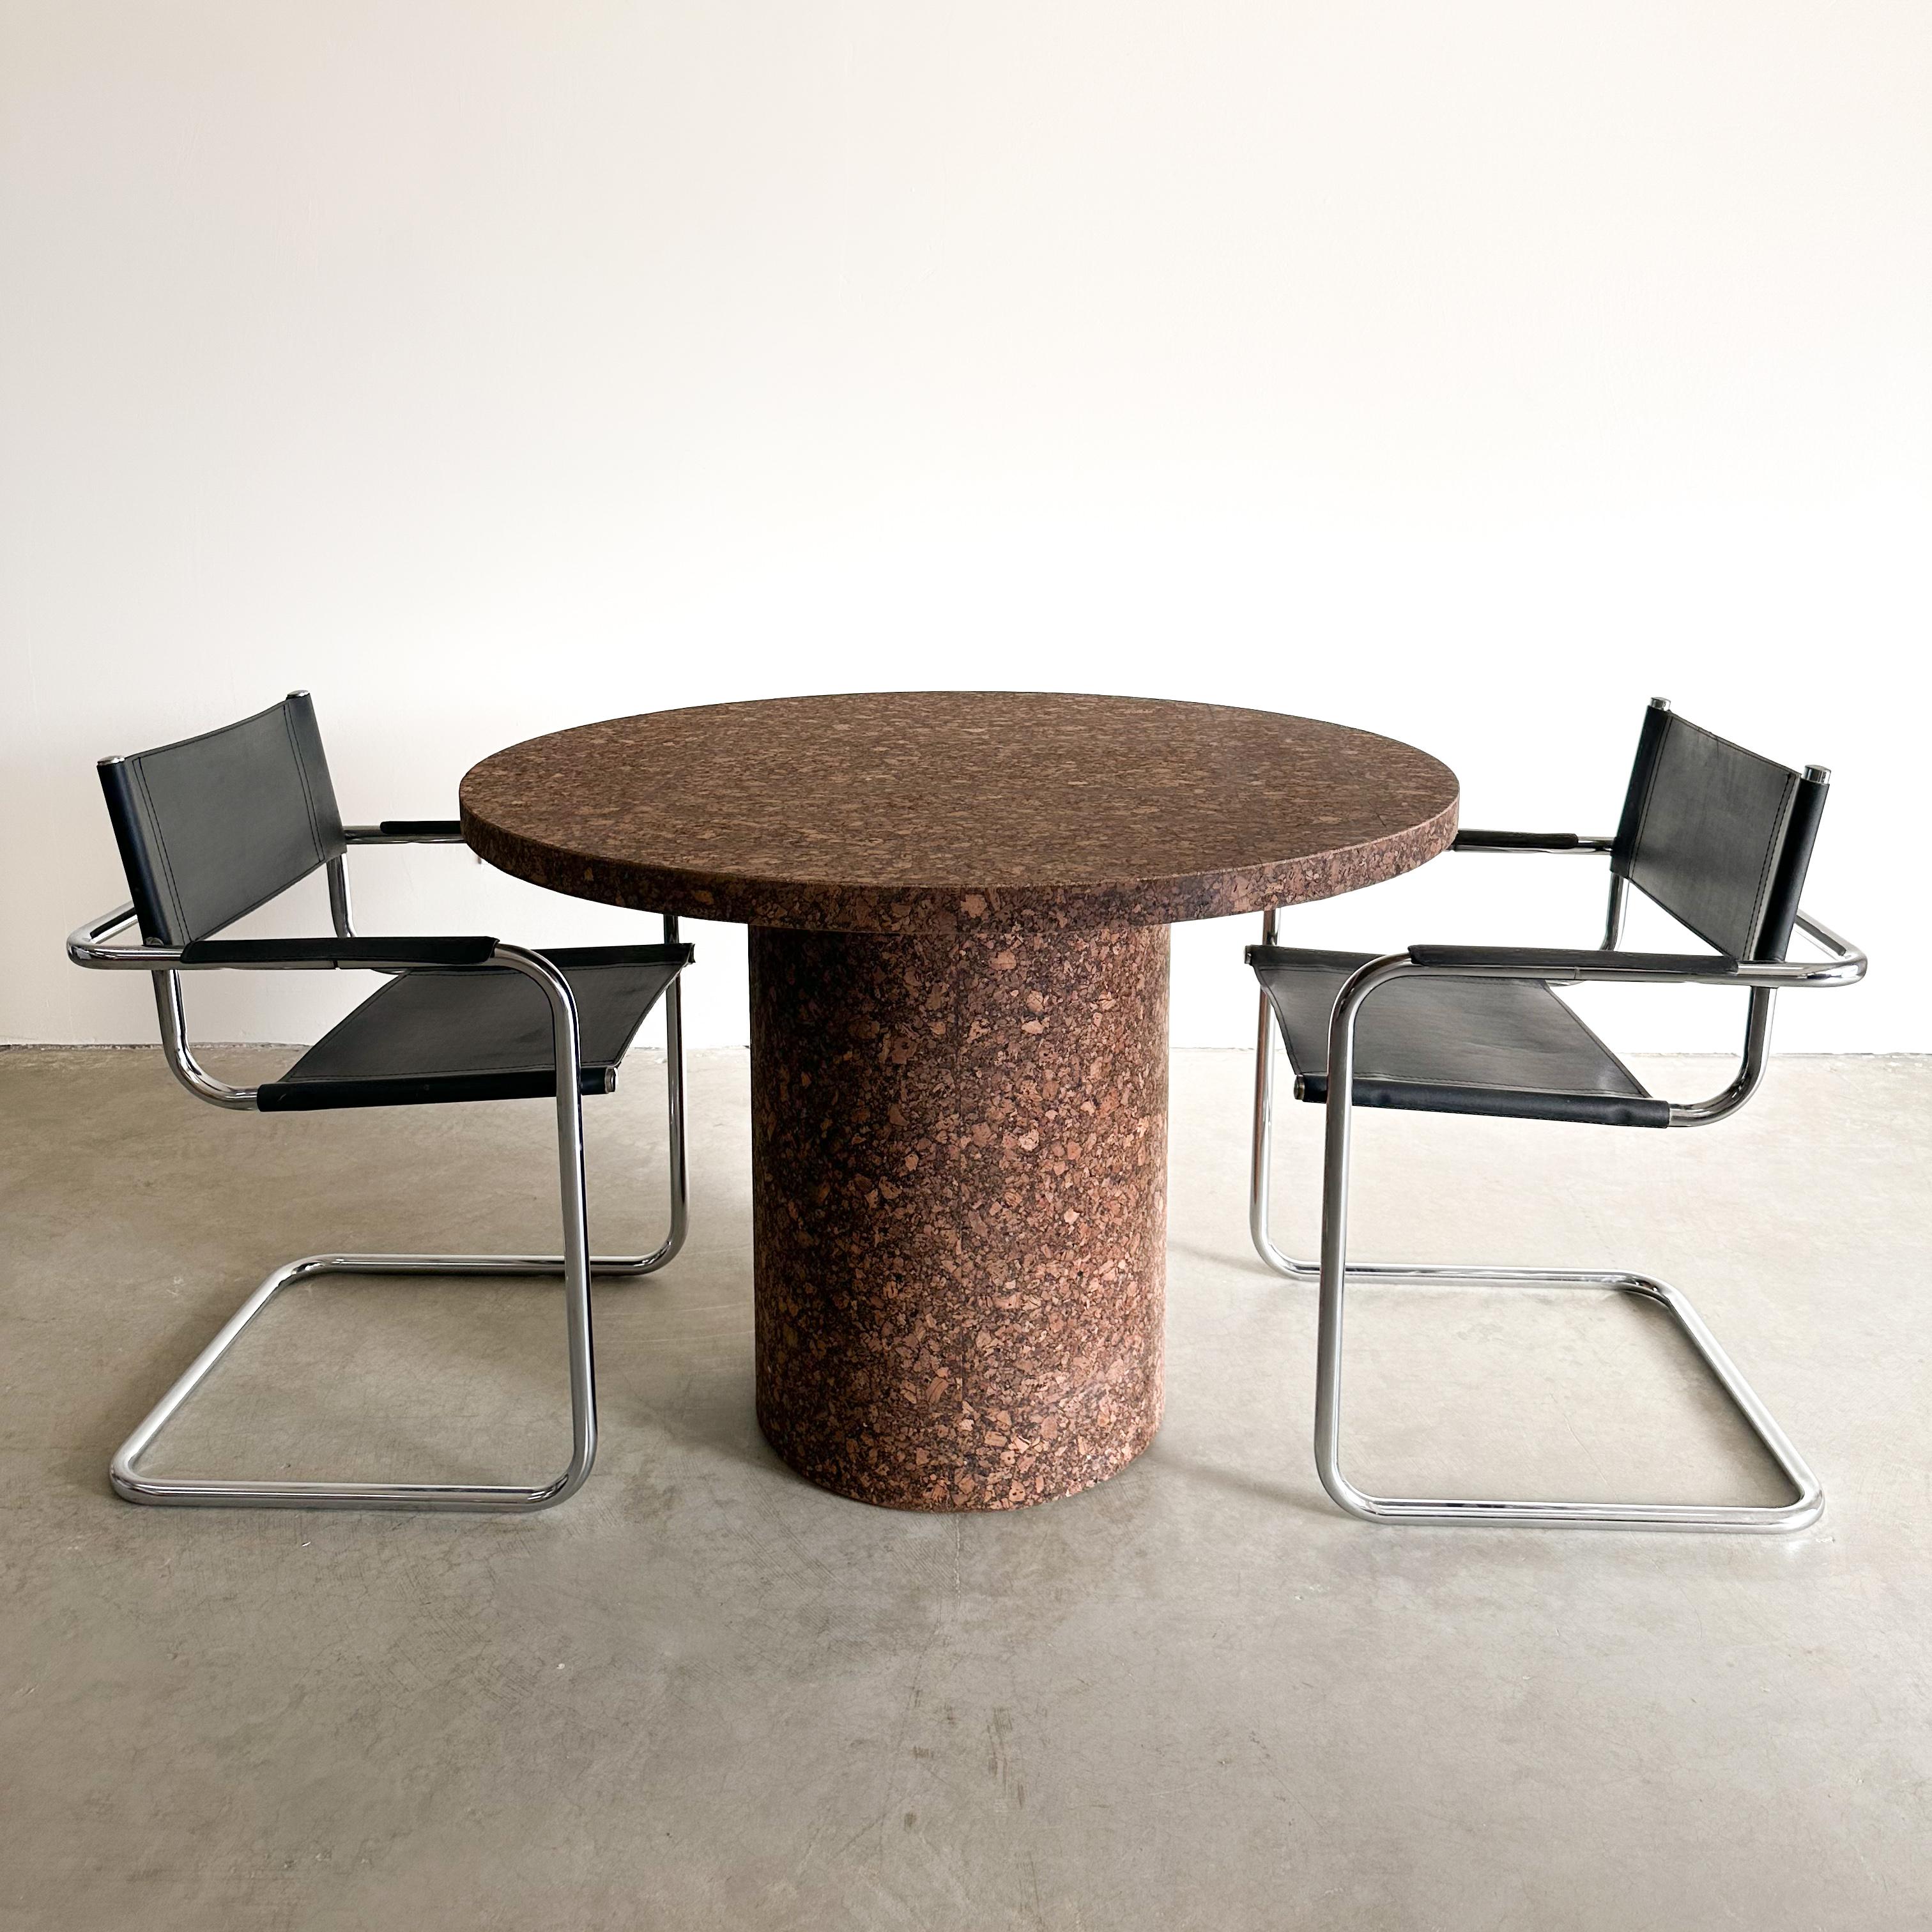 Vintage Round Cork Dining Table.
The structure is made out of wood and has been veneered with cork. Seats 4 comfortably.

Color: Natural Cork (similar to burlwood)

Measurements:
Diameter: 42